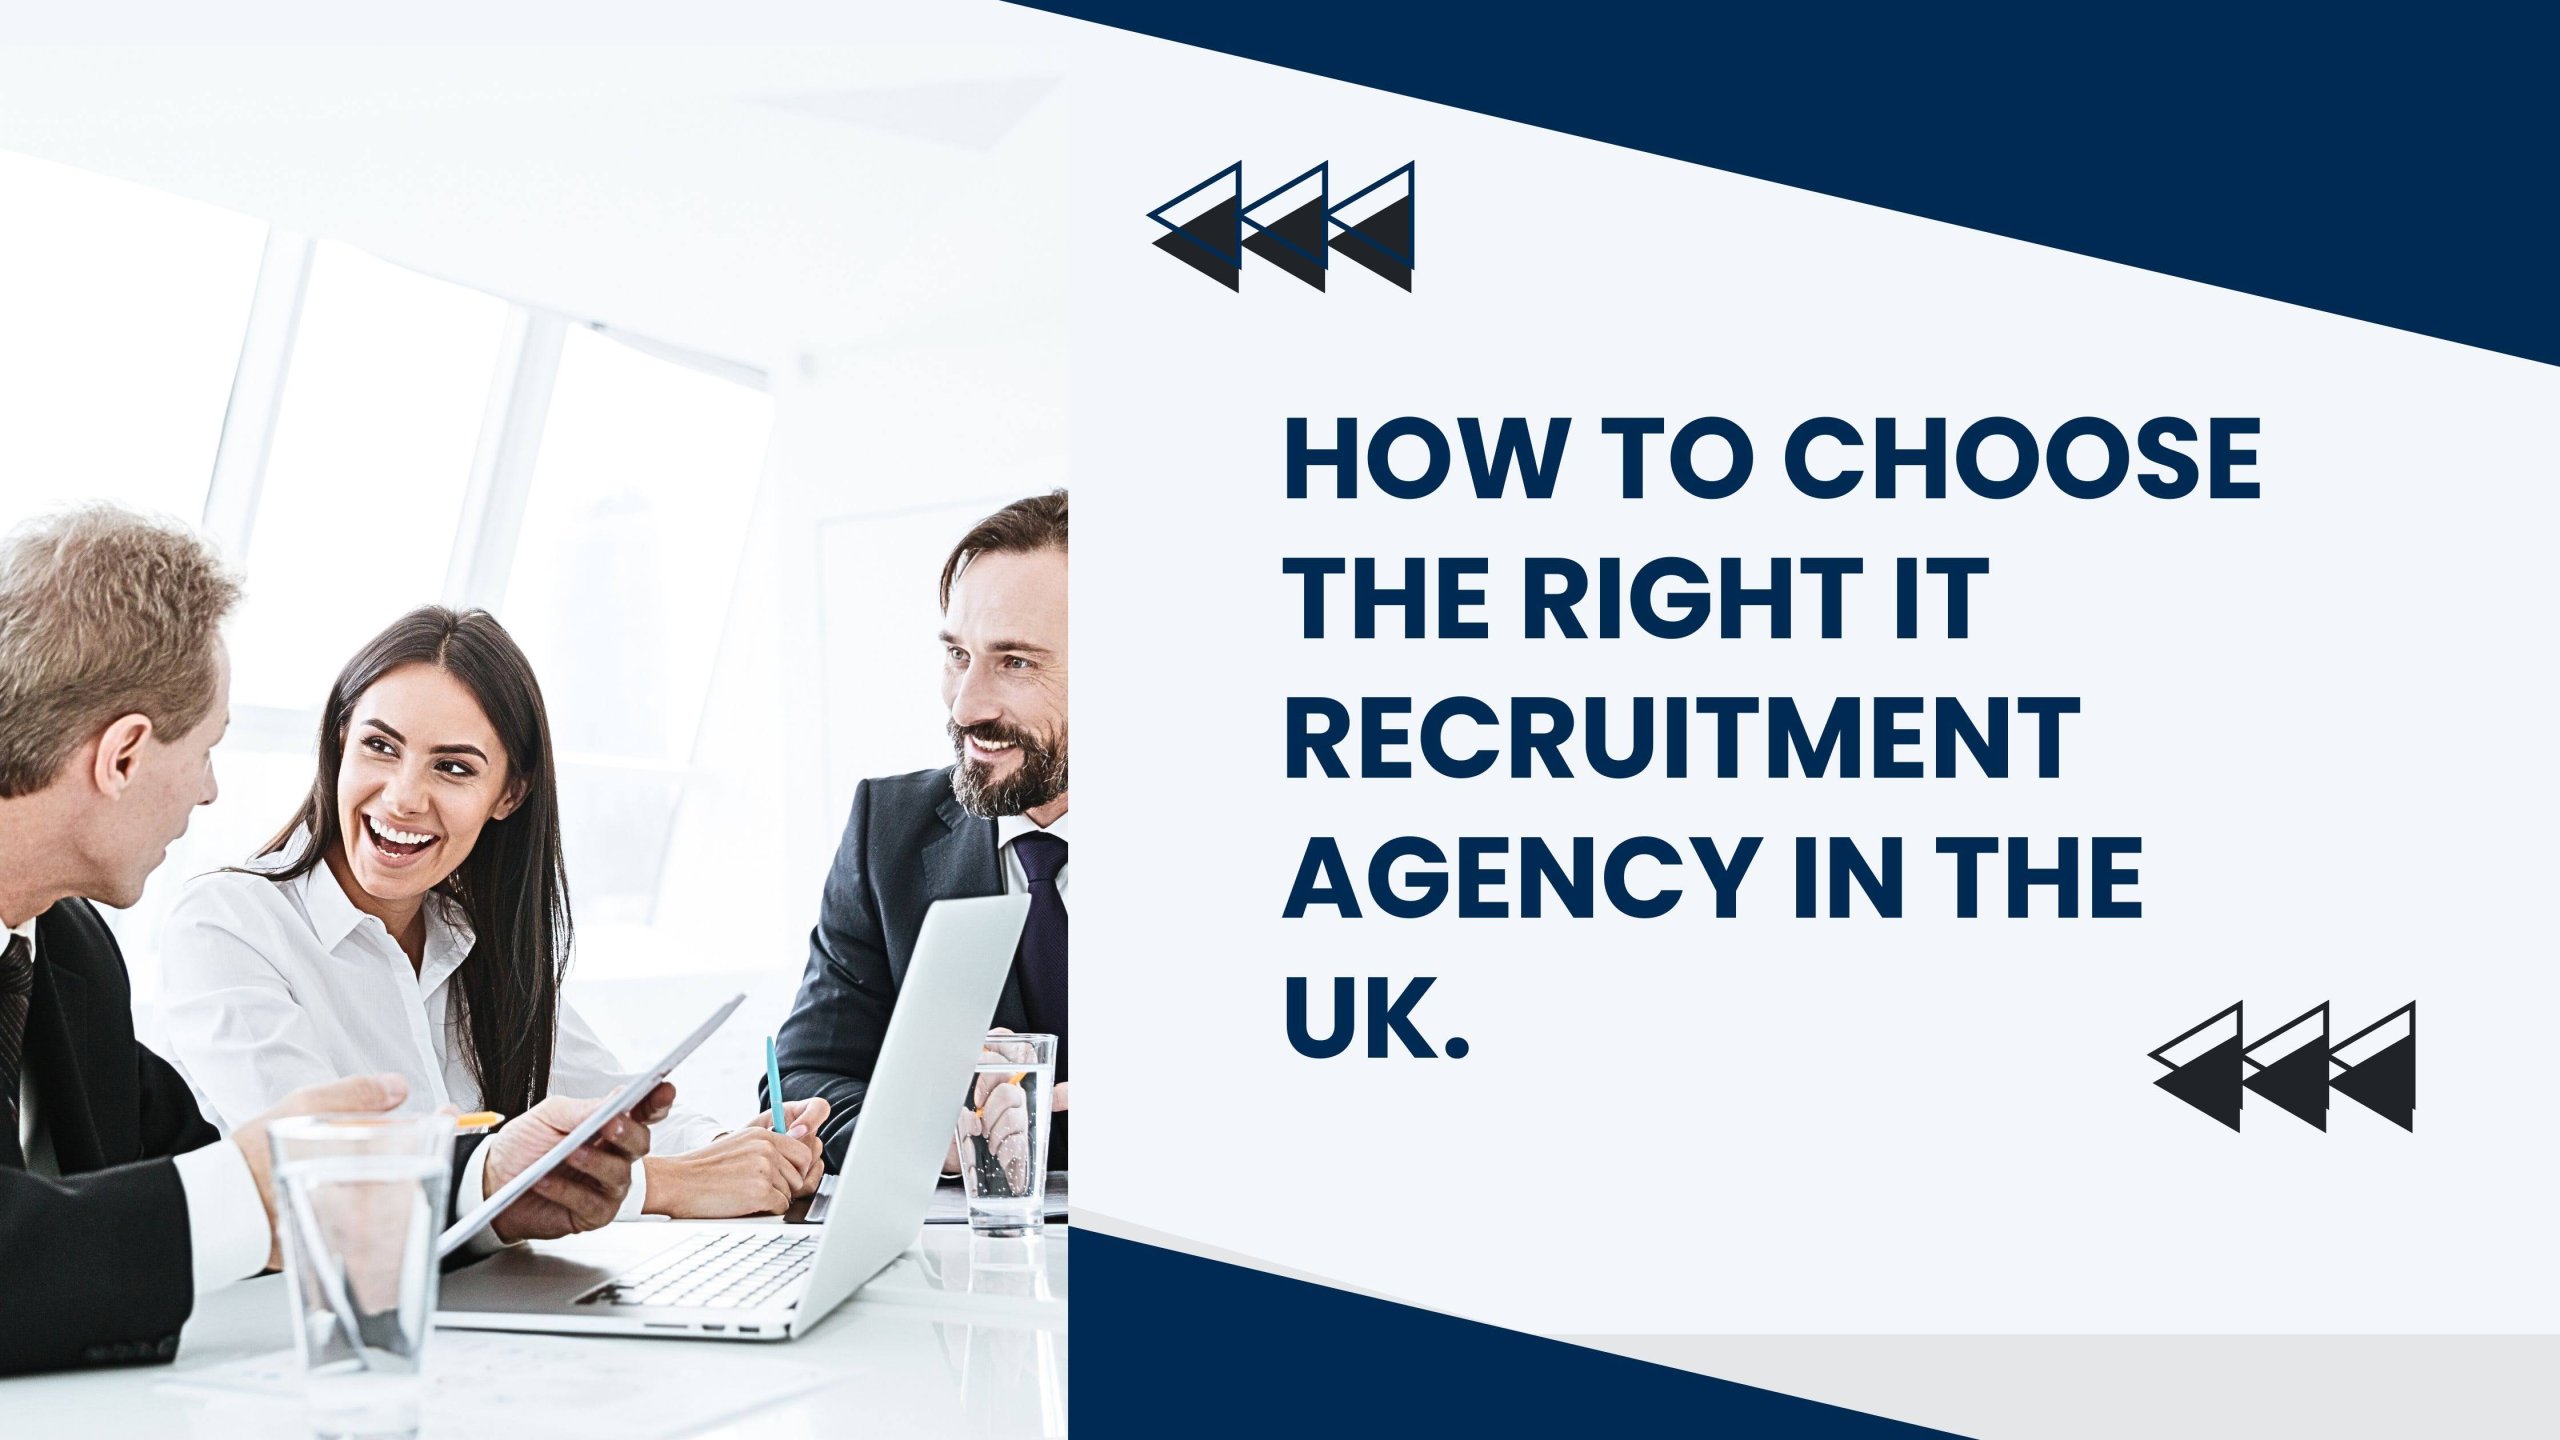 IT Recruitment Agency in the UK